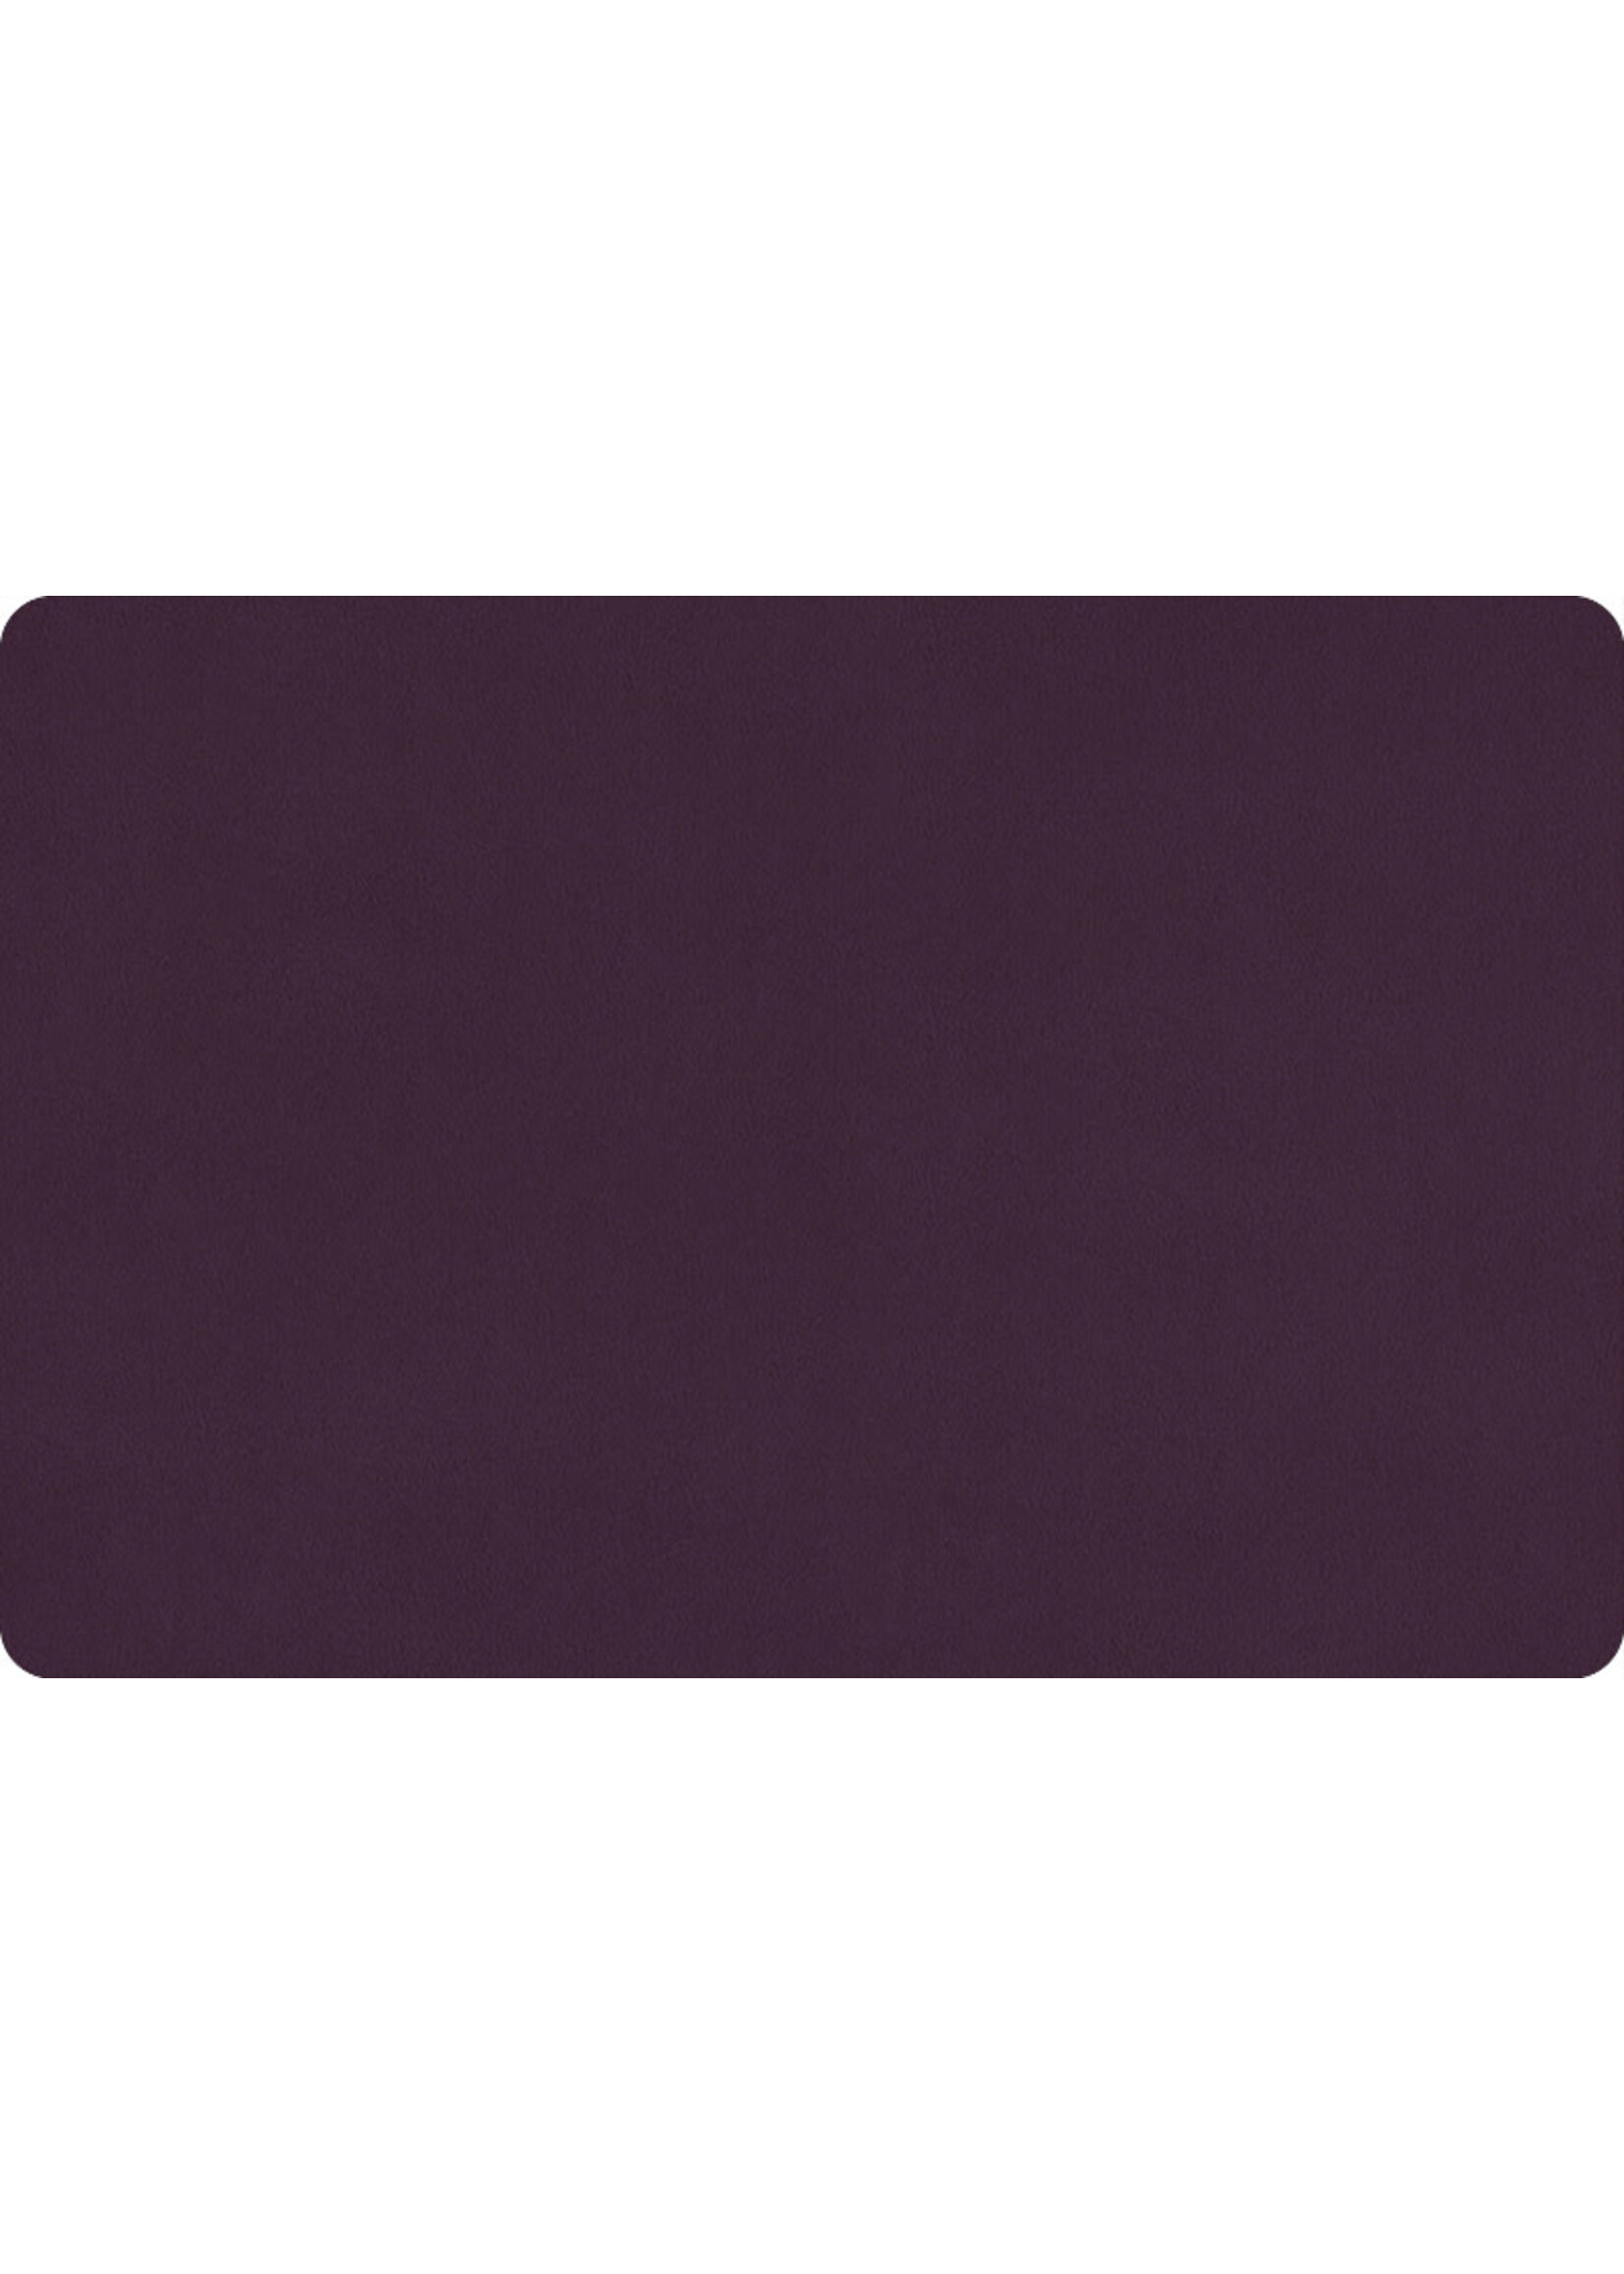 Shannon Fabrics Minky, Extra Wide Solid Cuddle3, 90" Berry, (by the inch)